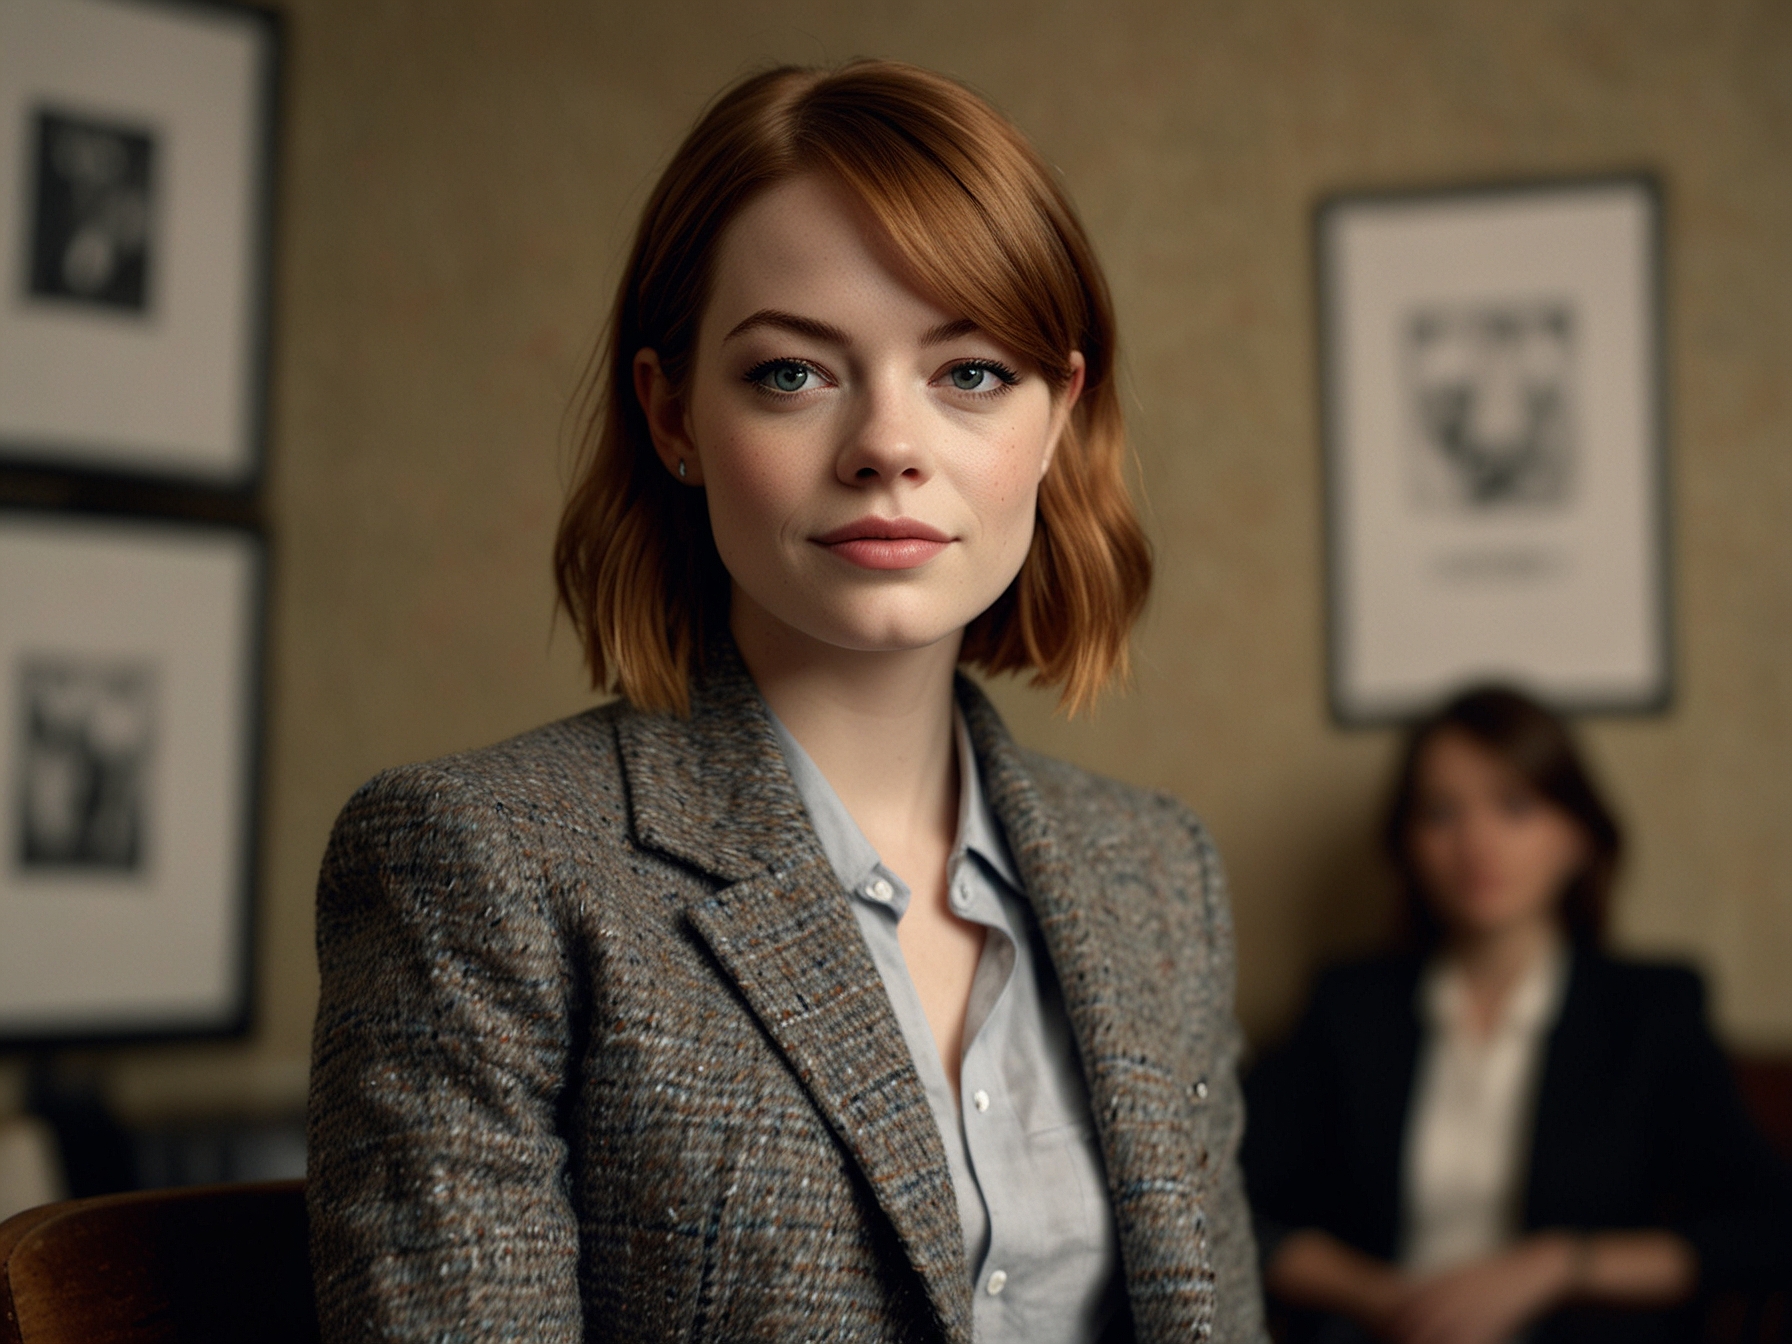 In a close-up shot, Emma Stone sits for an interview, her tweed ensemble highlighting her fashion-forward style. The background subtly hints at her media tour, featuring promotional posters of 'Kinds Of Kindness'.